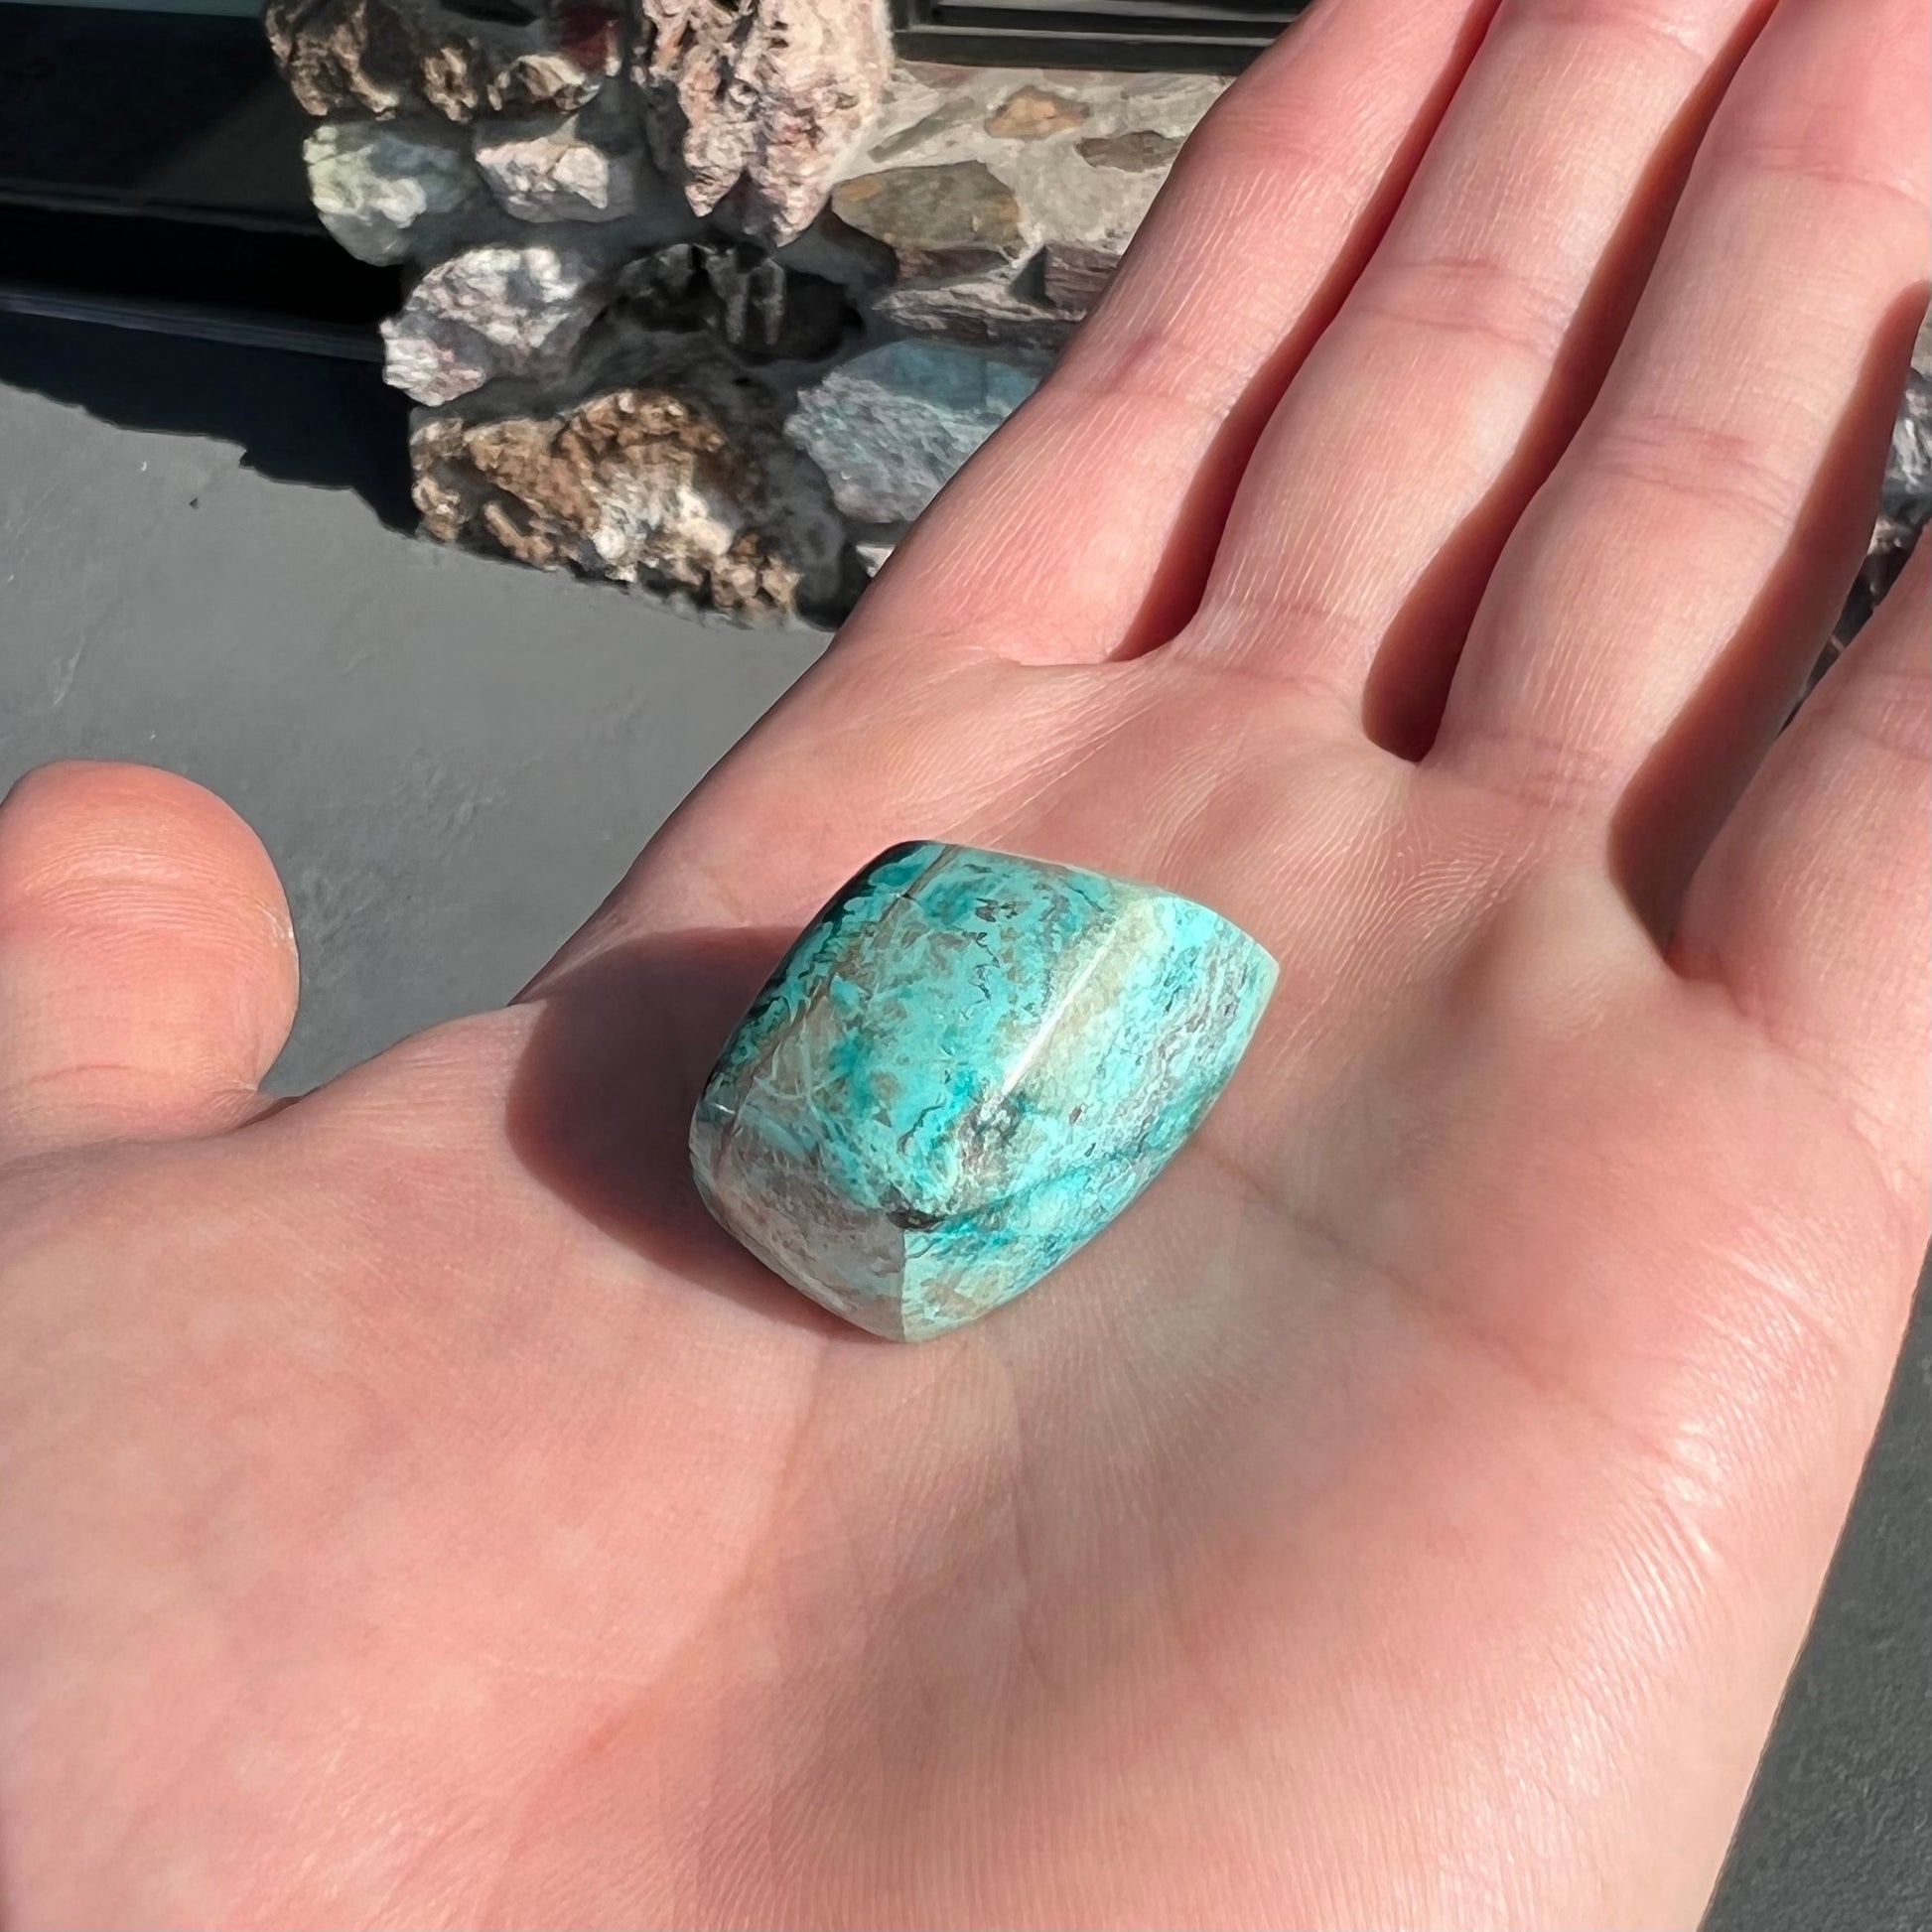 A loose, polished turquoise specimen with azurite inclusions.